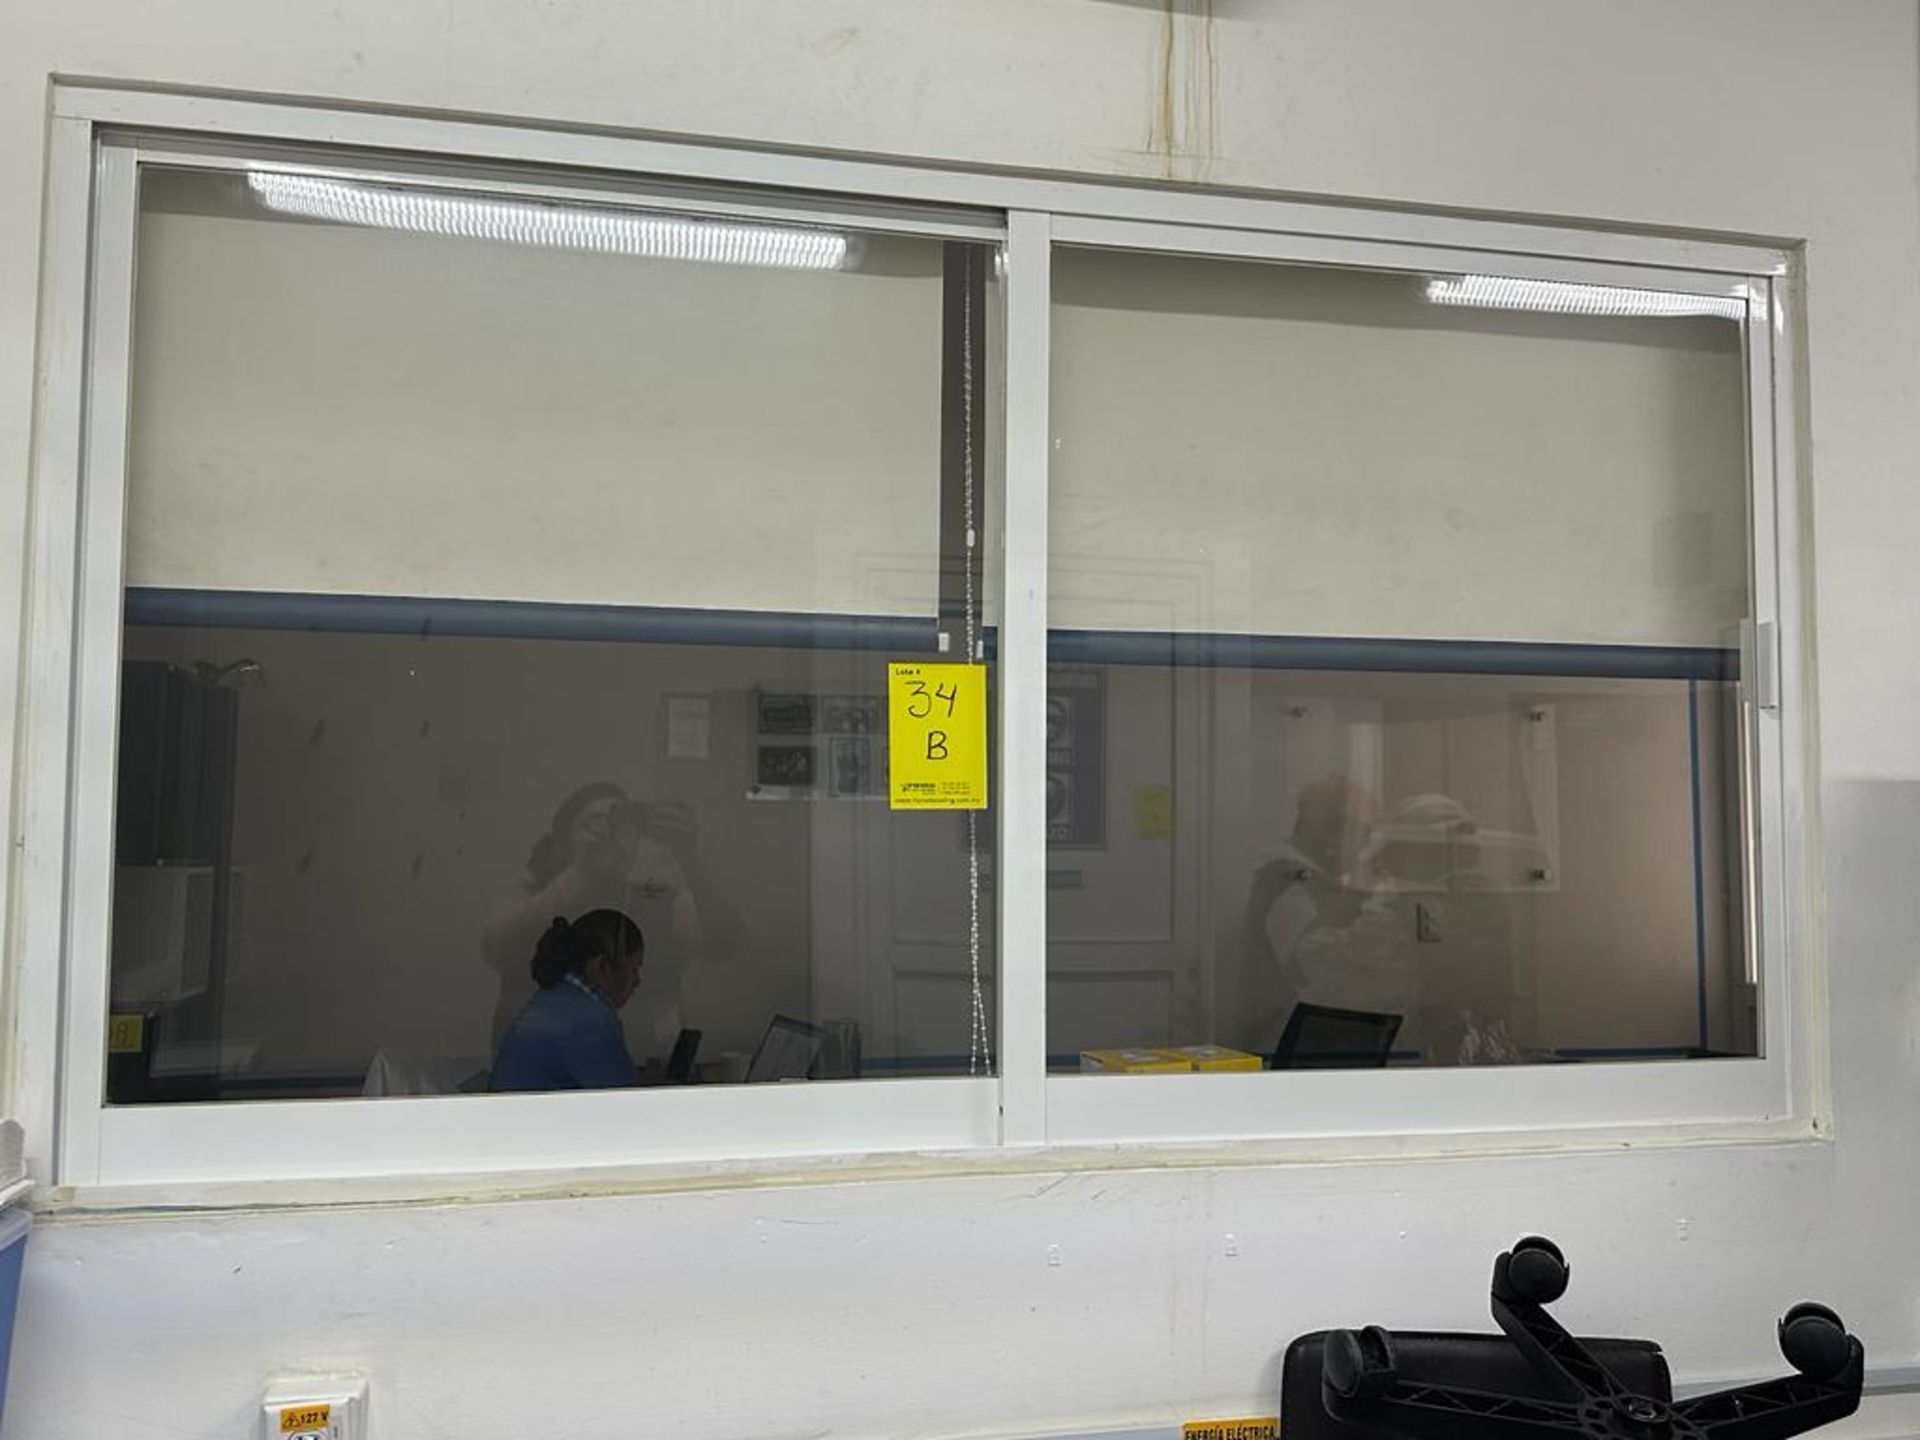 Lot consists of: 1 aluminum window with glass measures approximately 11.98 x 1.49 m; 1 aluminum - Image 14 of 26